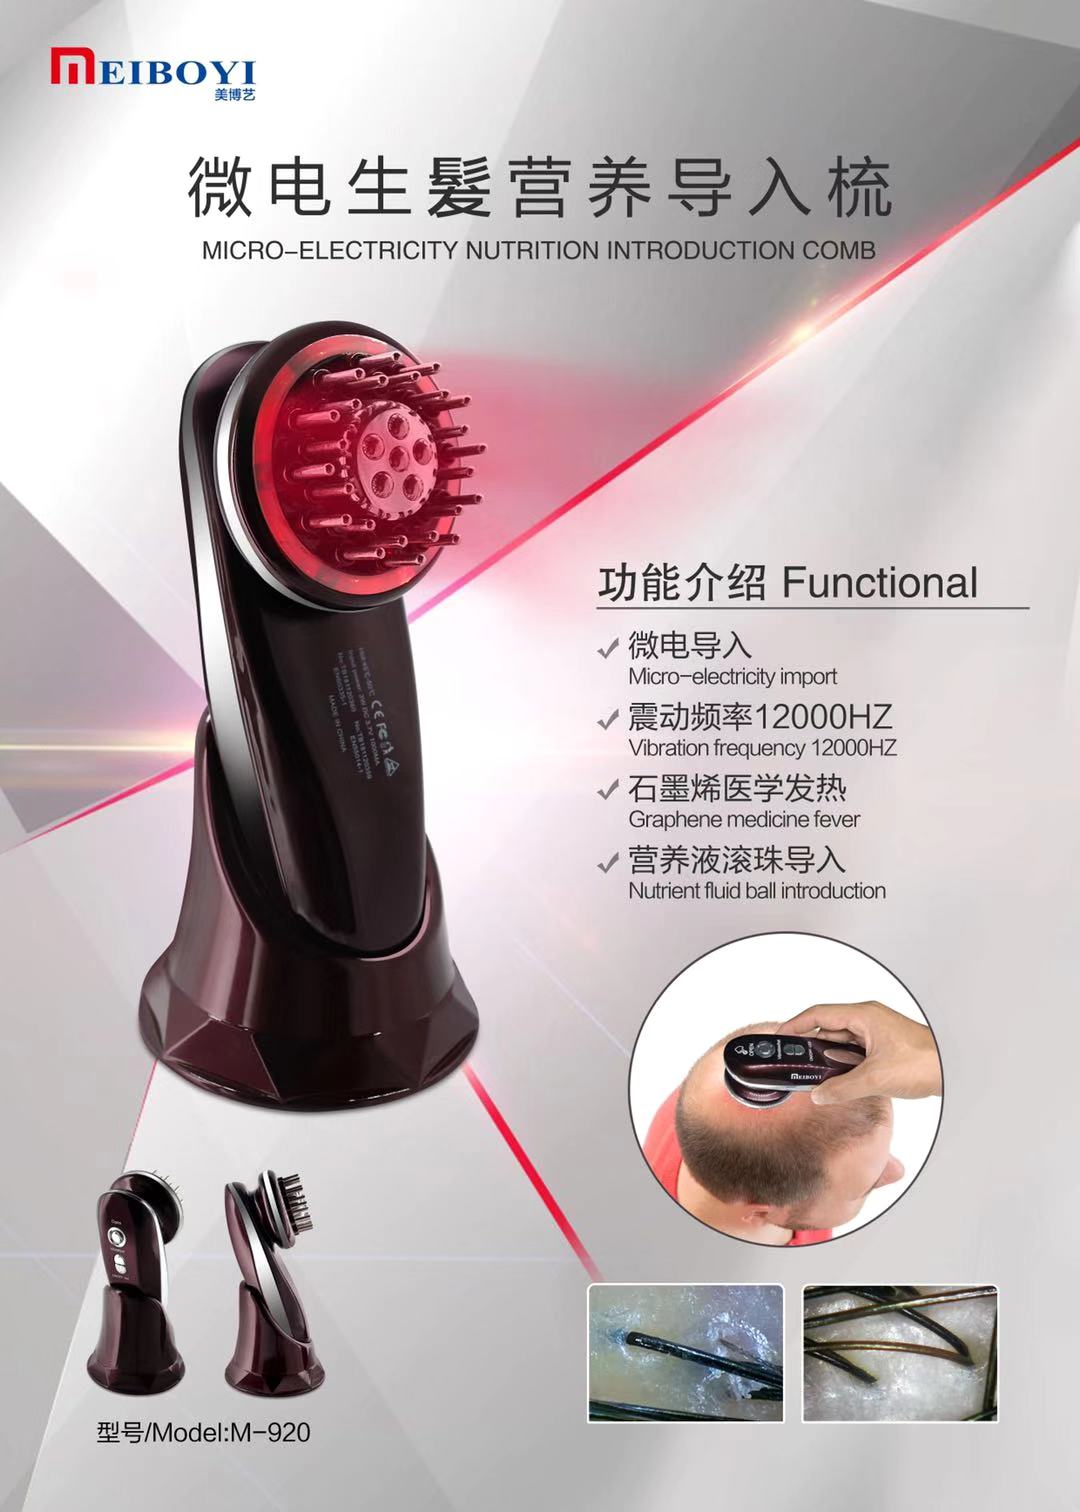 MICRO-ELECTRICITY NUTRITION INTRODUCTION COMB